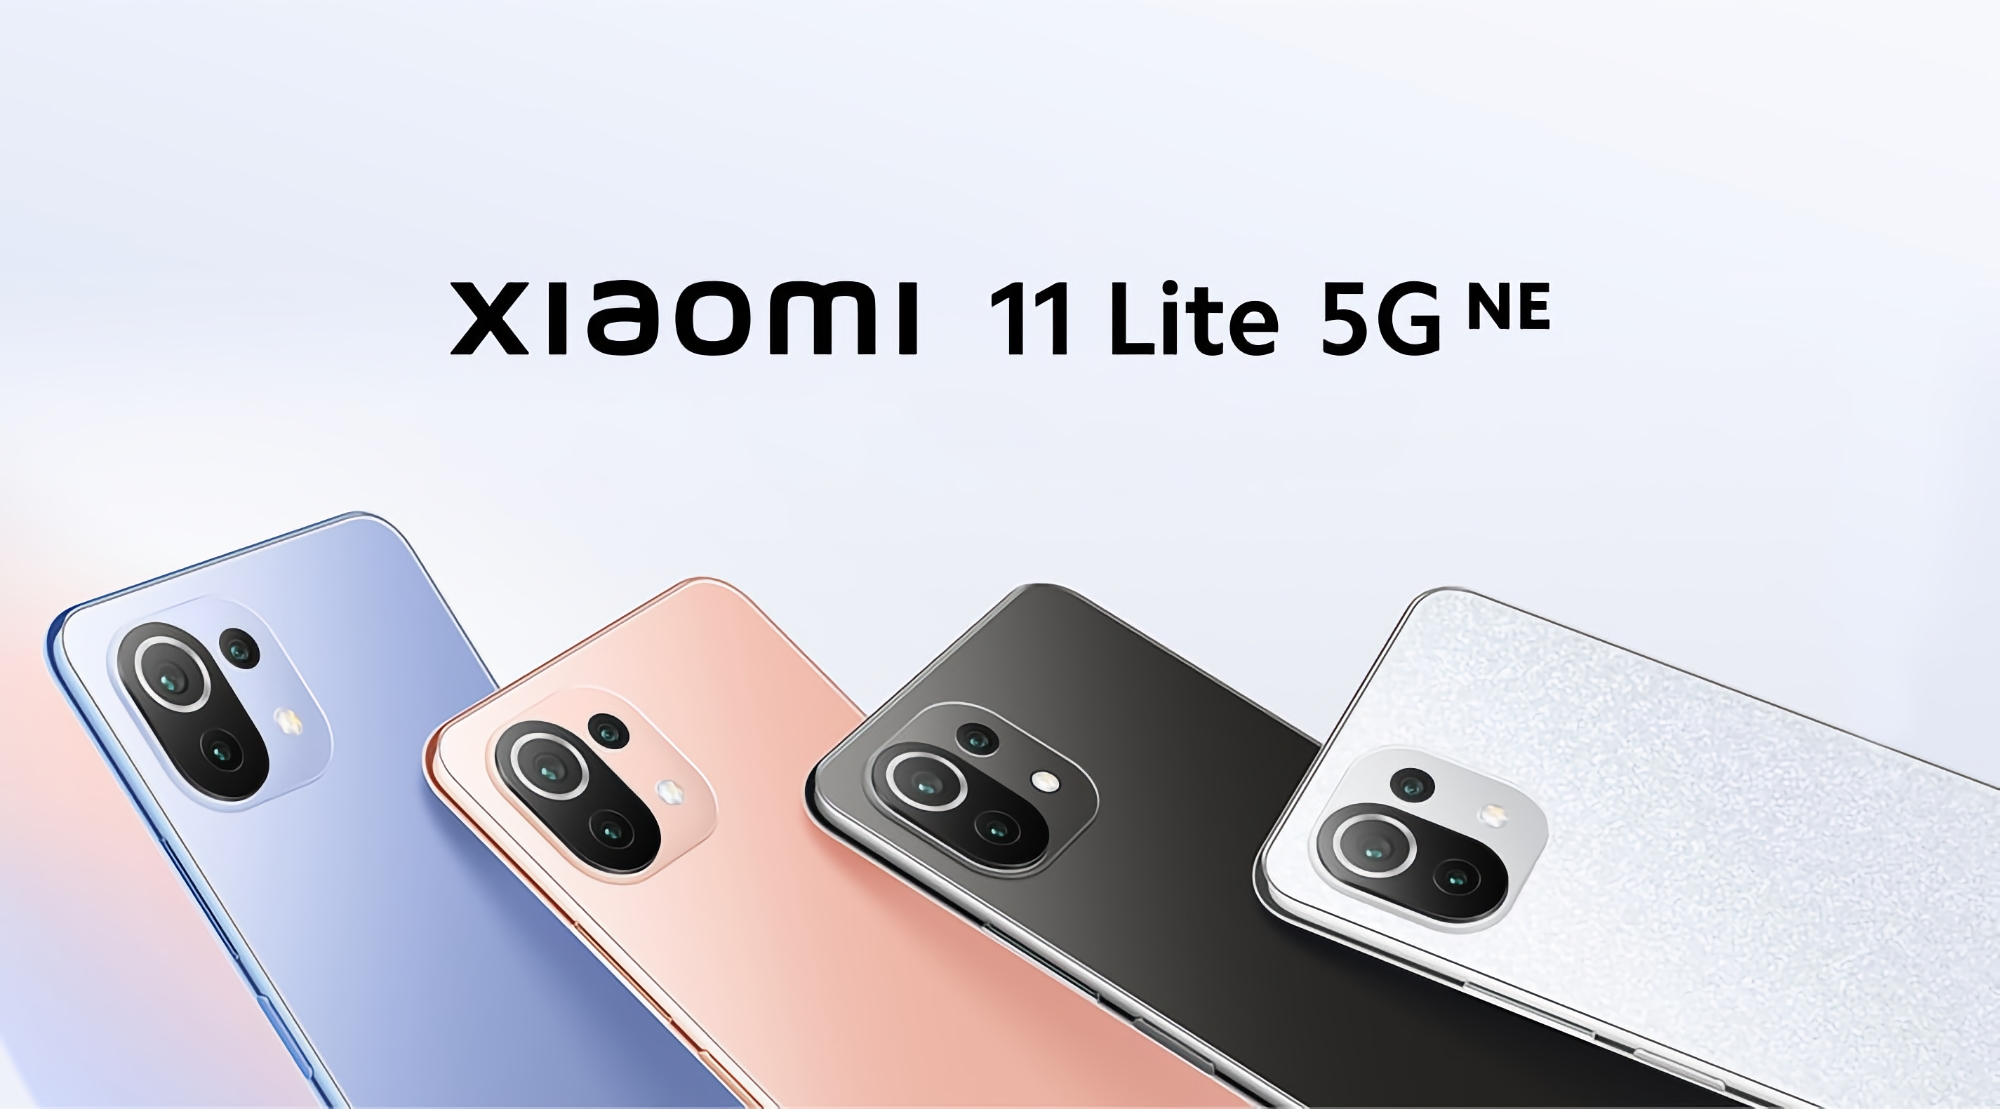 Xiaomi 11 Lite 5G NE: smartphone with 6.8mm body thickness and Snapdragon 778G chip for $329